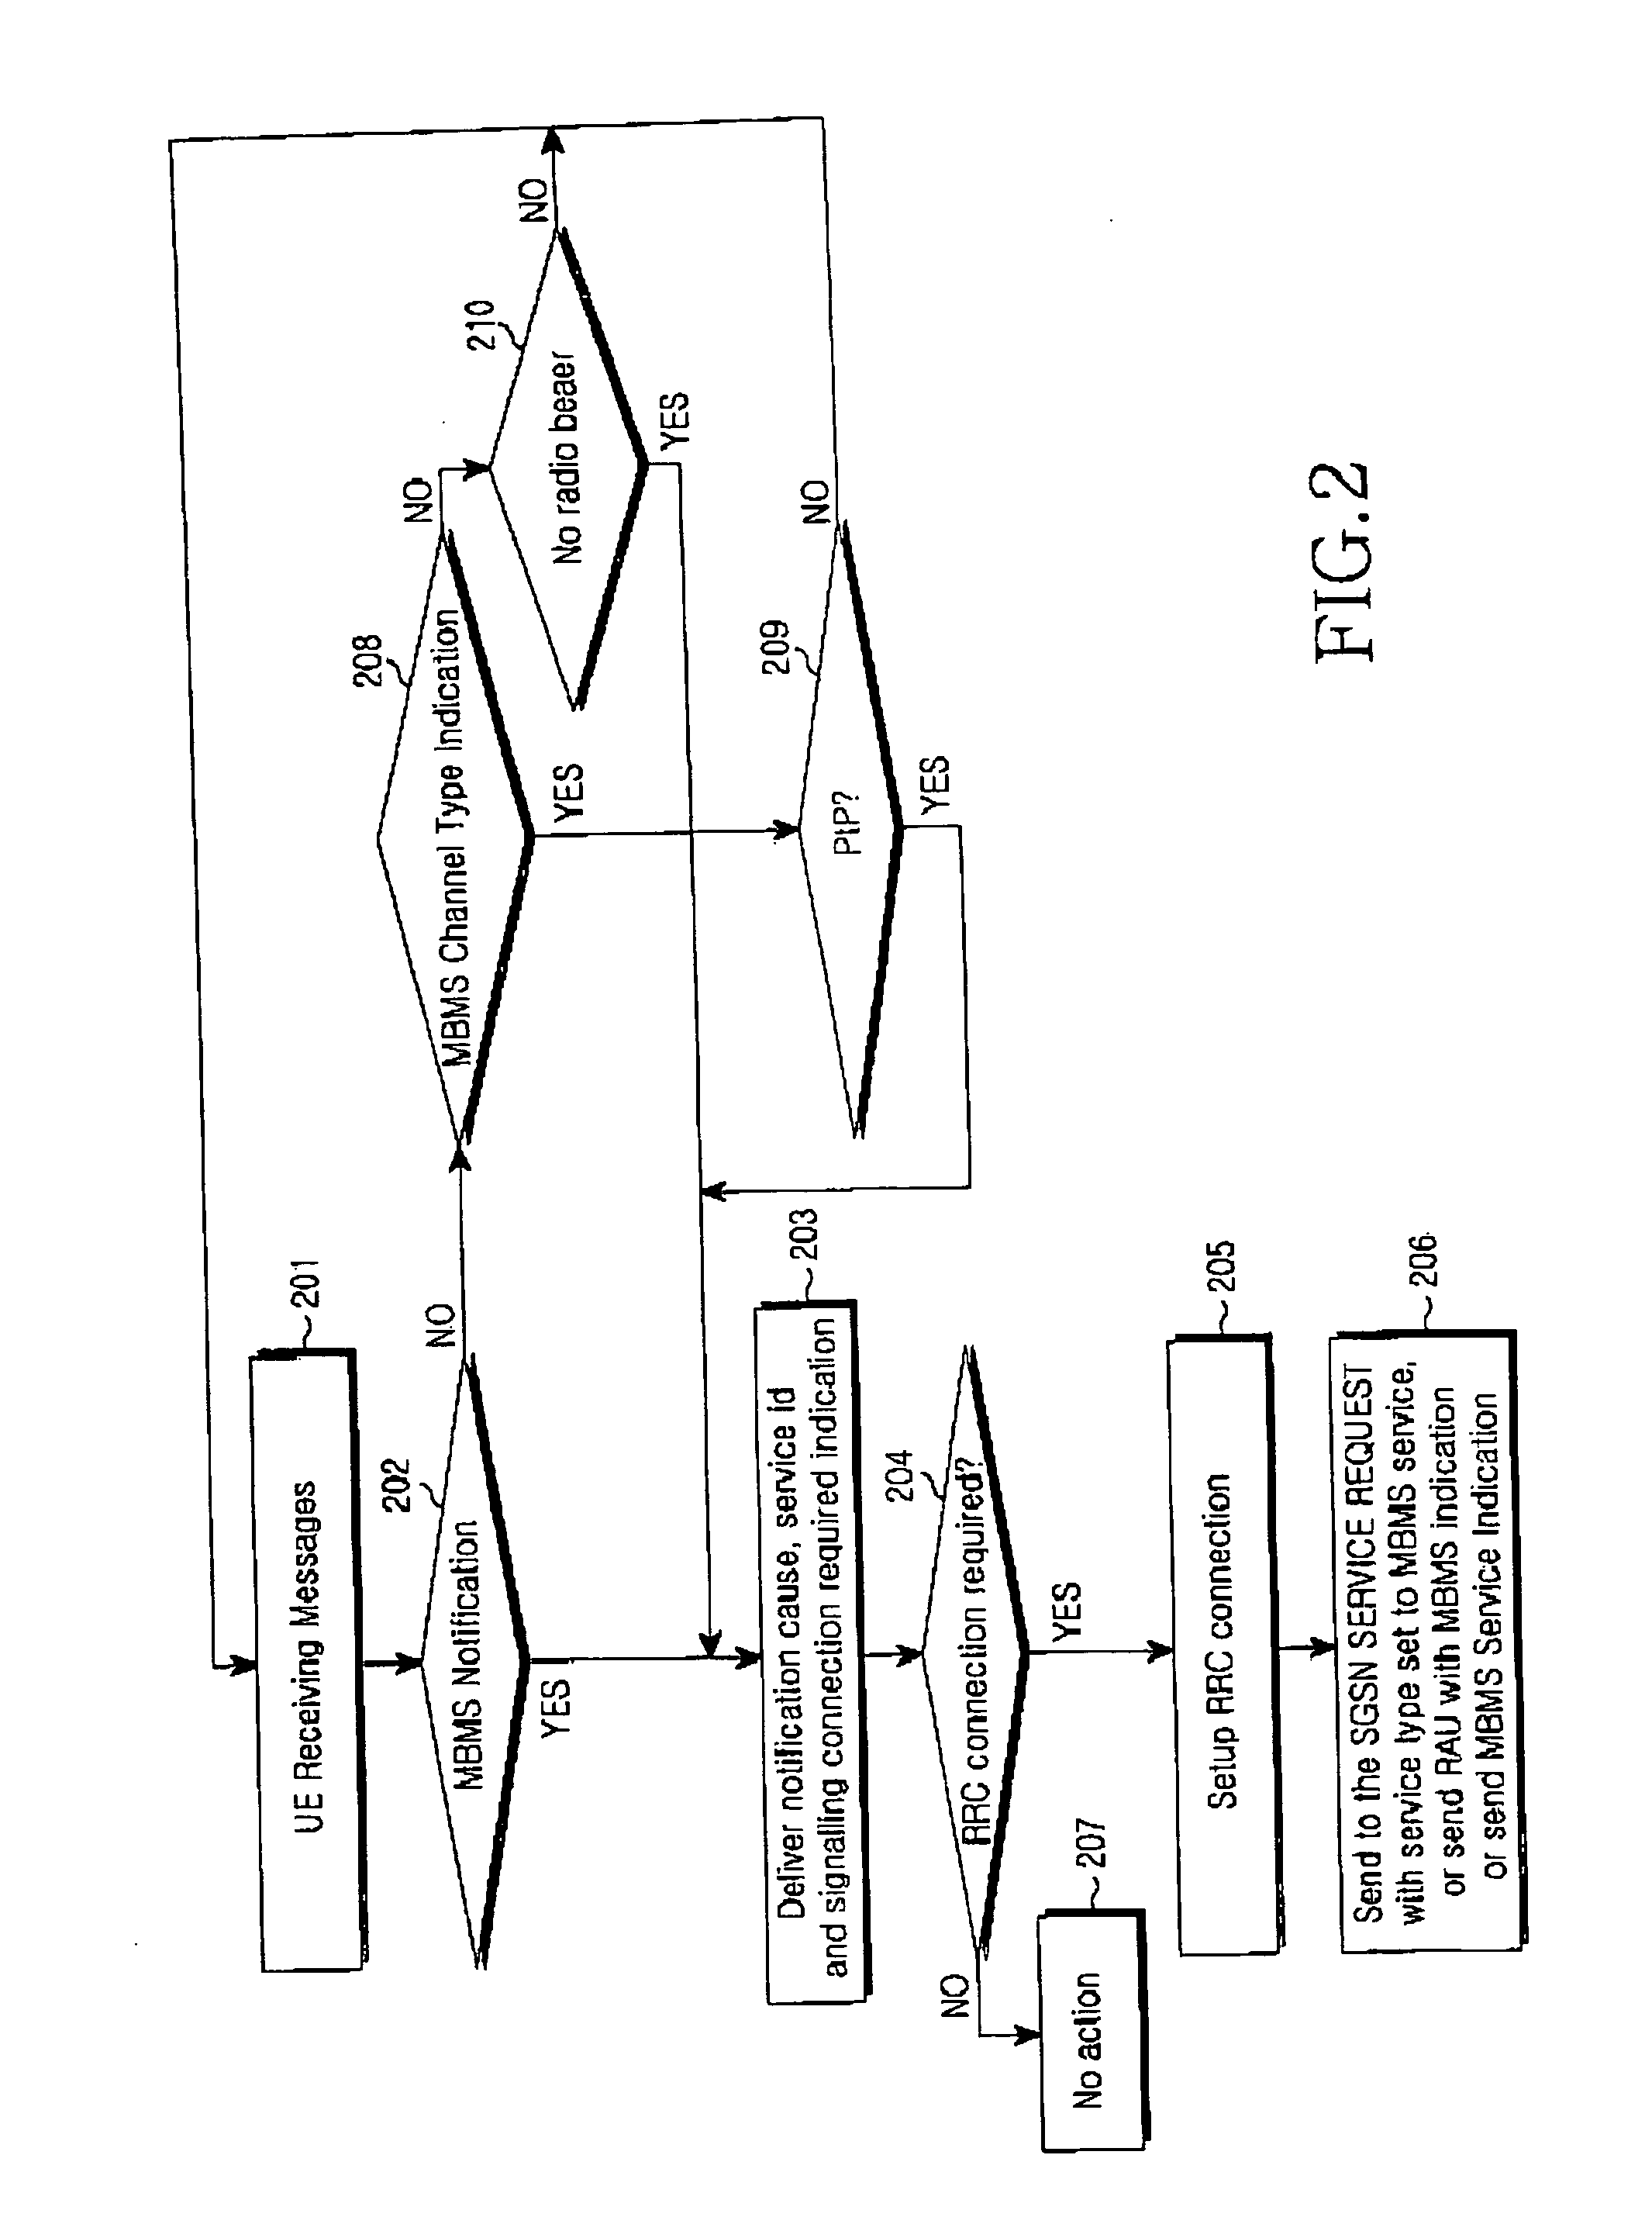 Method for distinguishing MBMS service request from other services requests